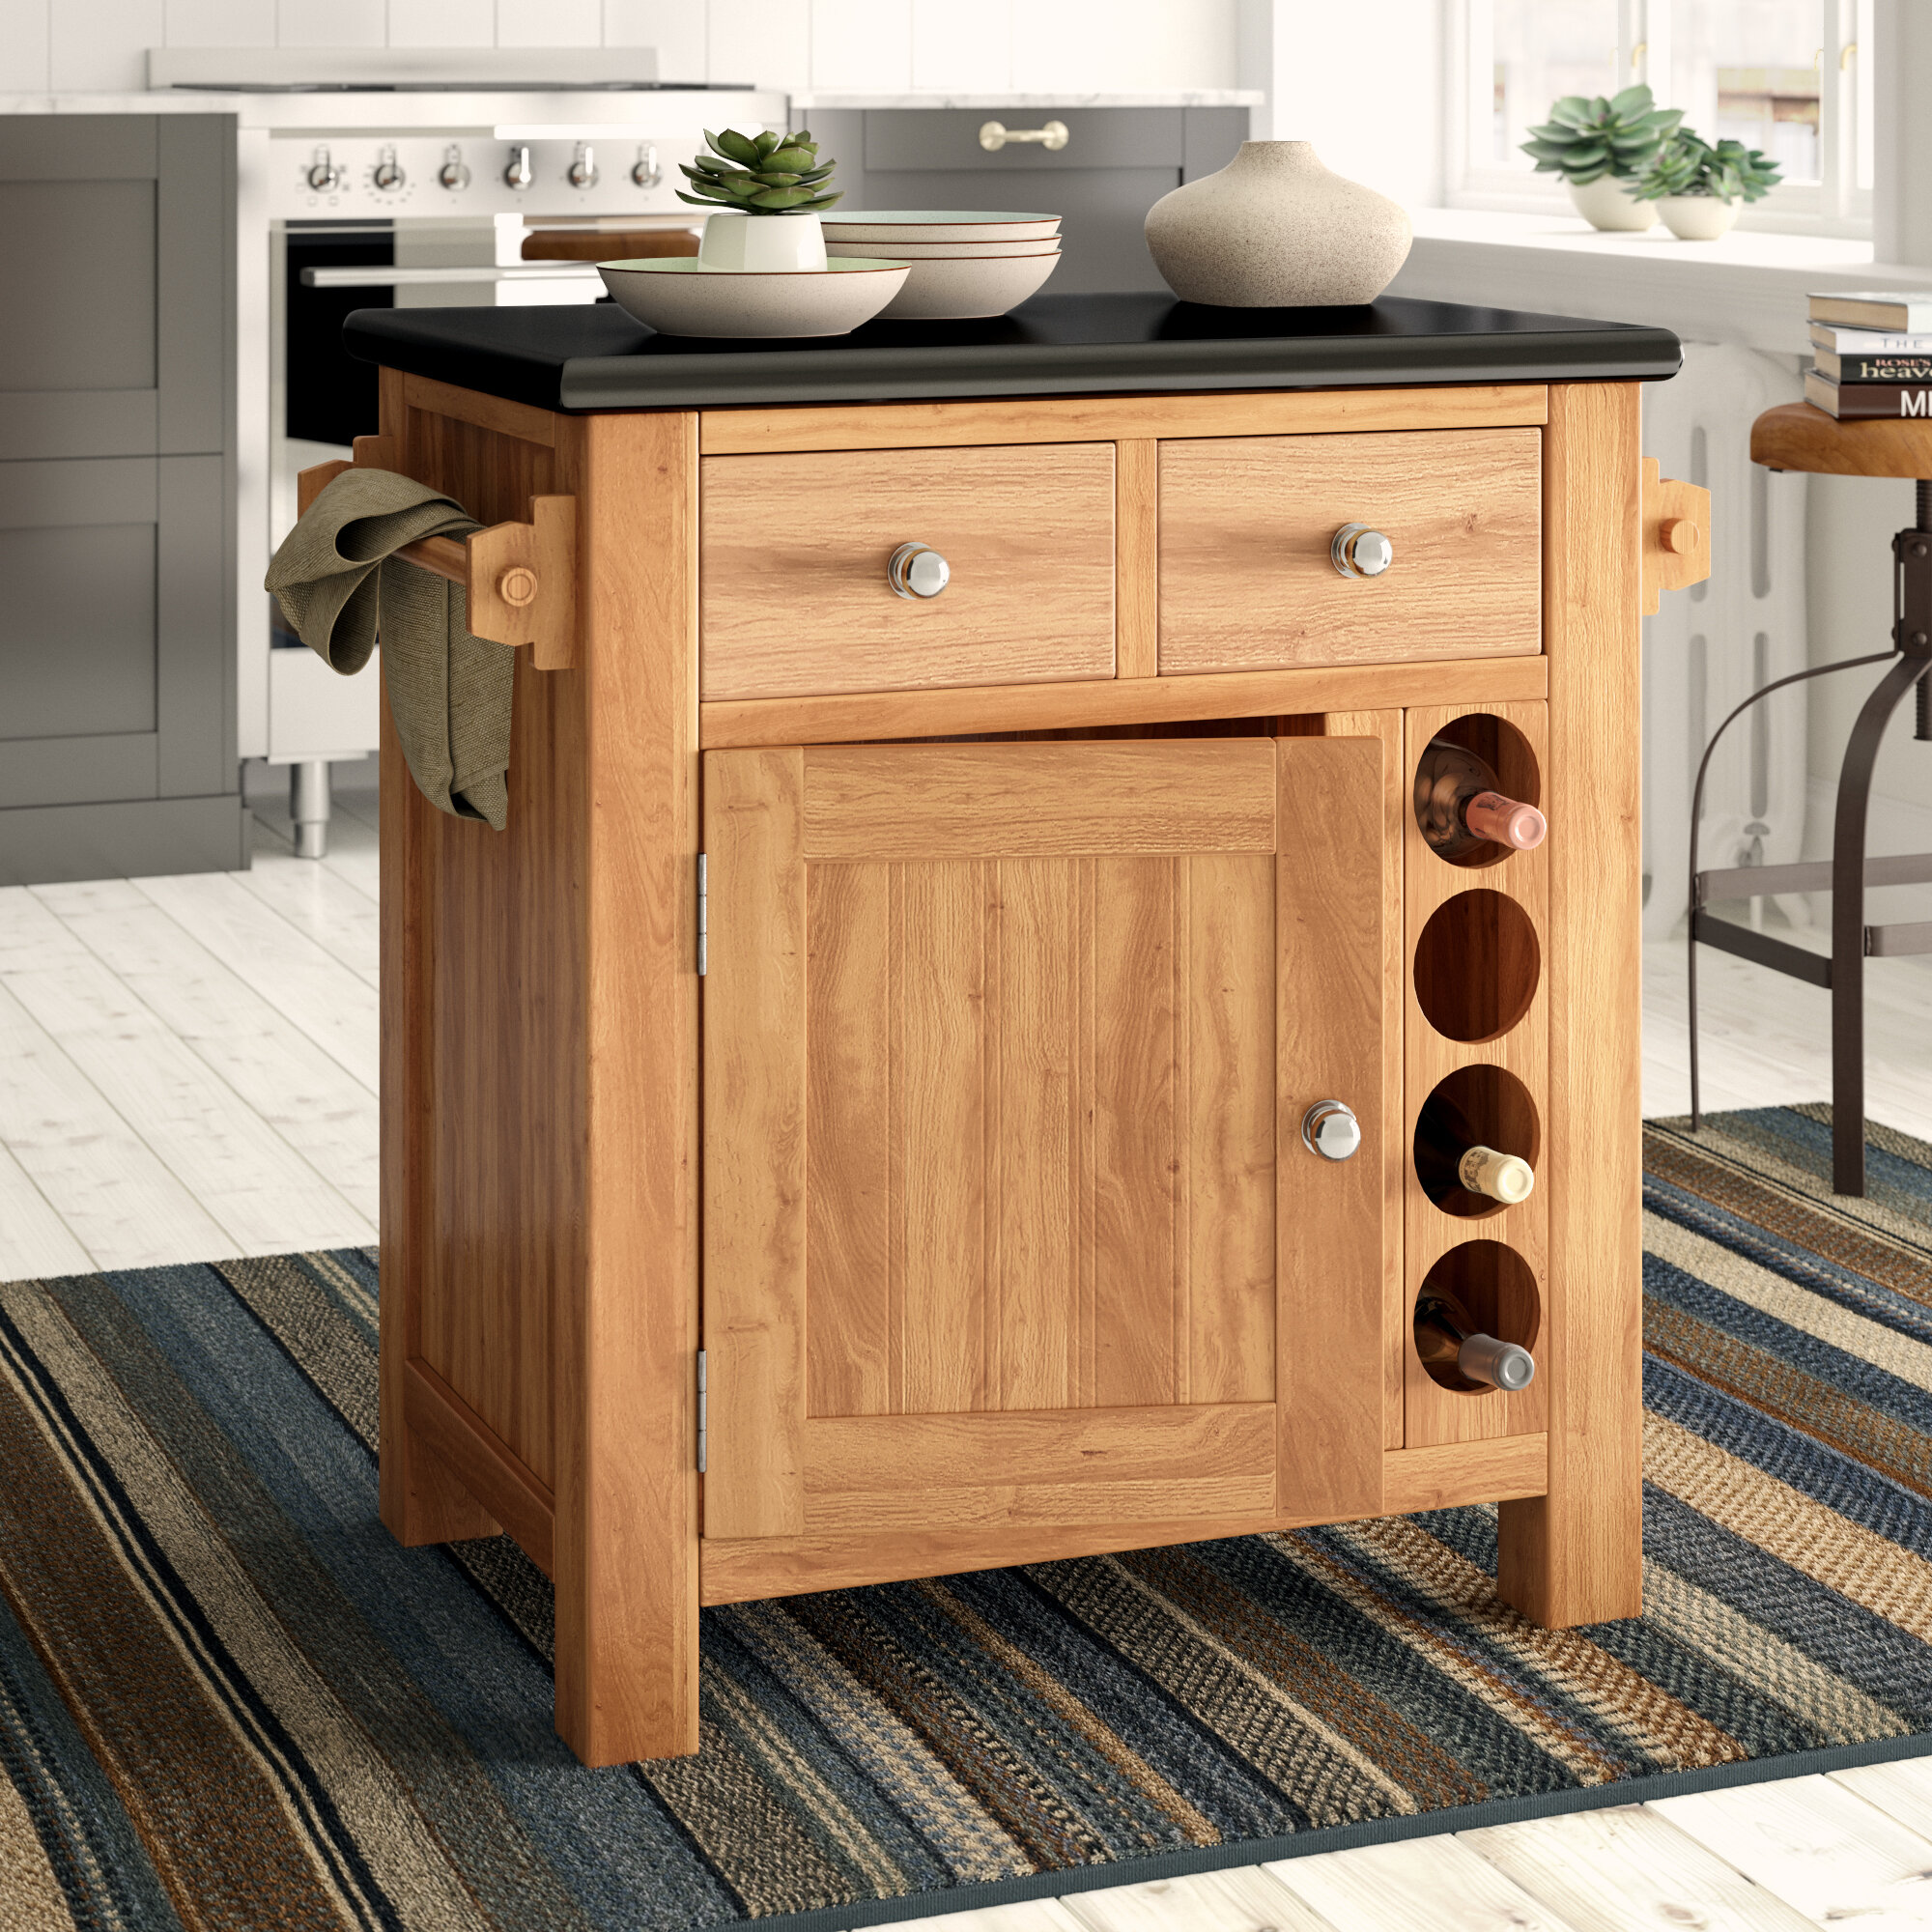 Union Rustic Kitchen Island With Granite Top Reviews Wayfaircouk